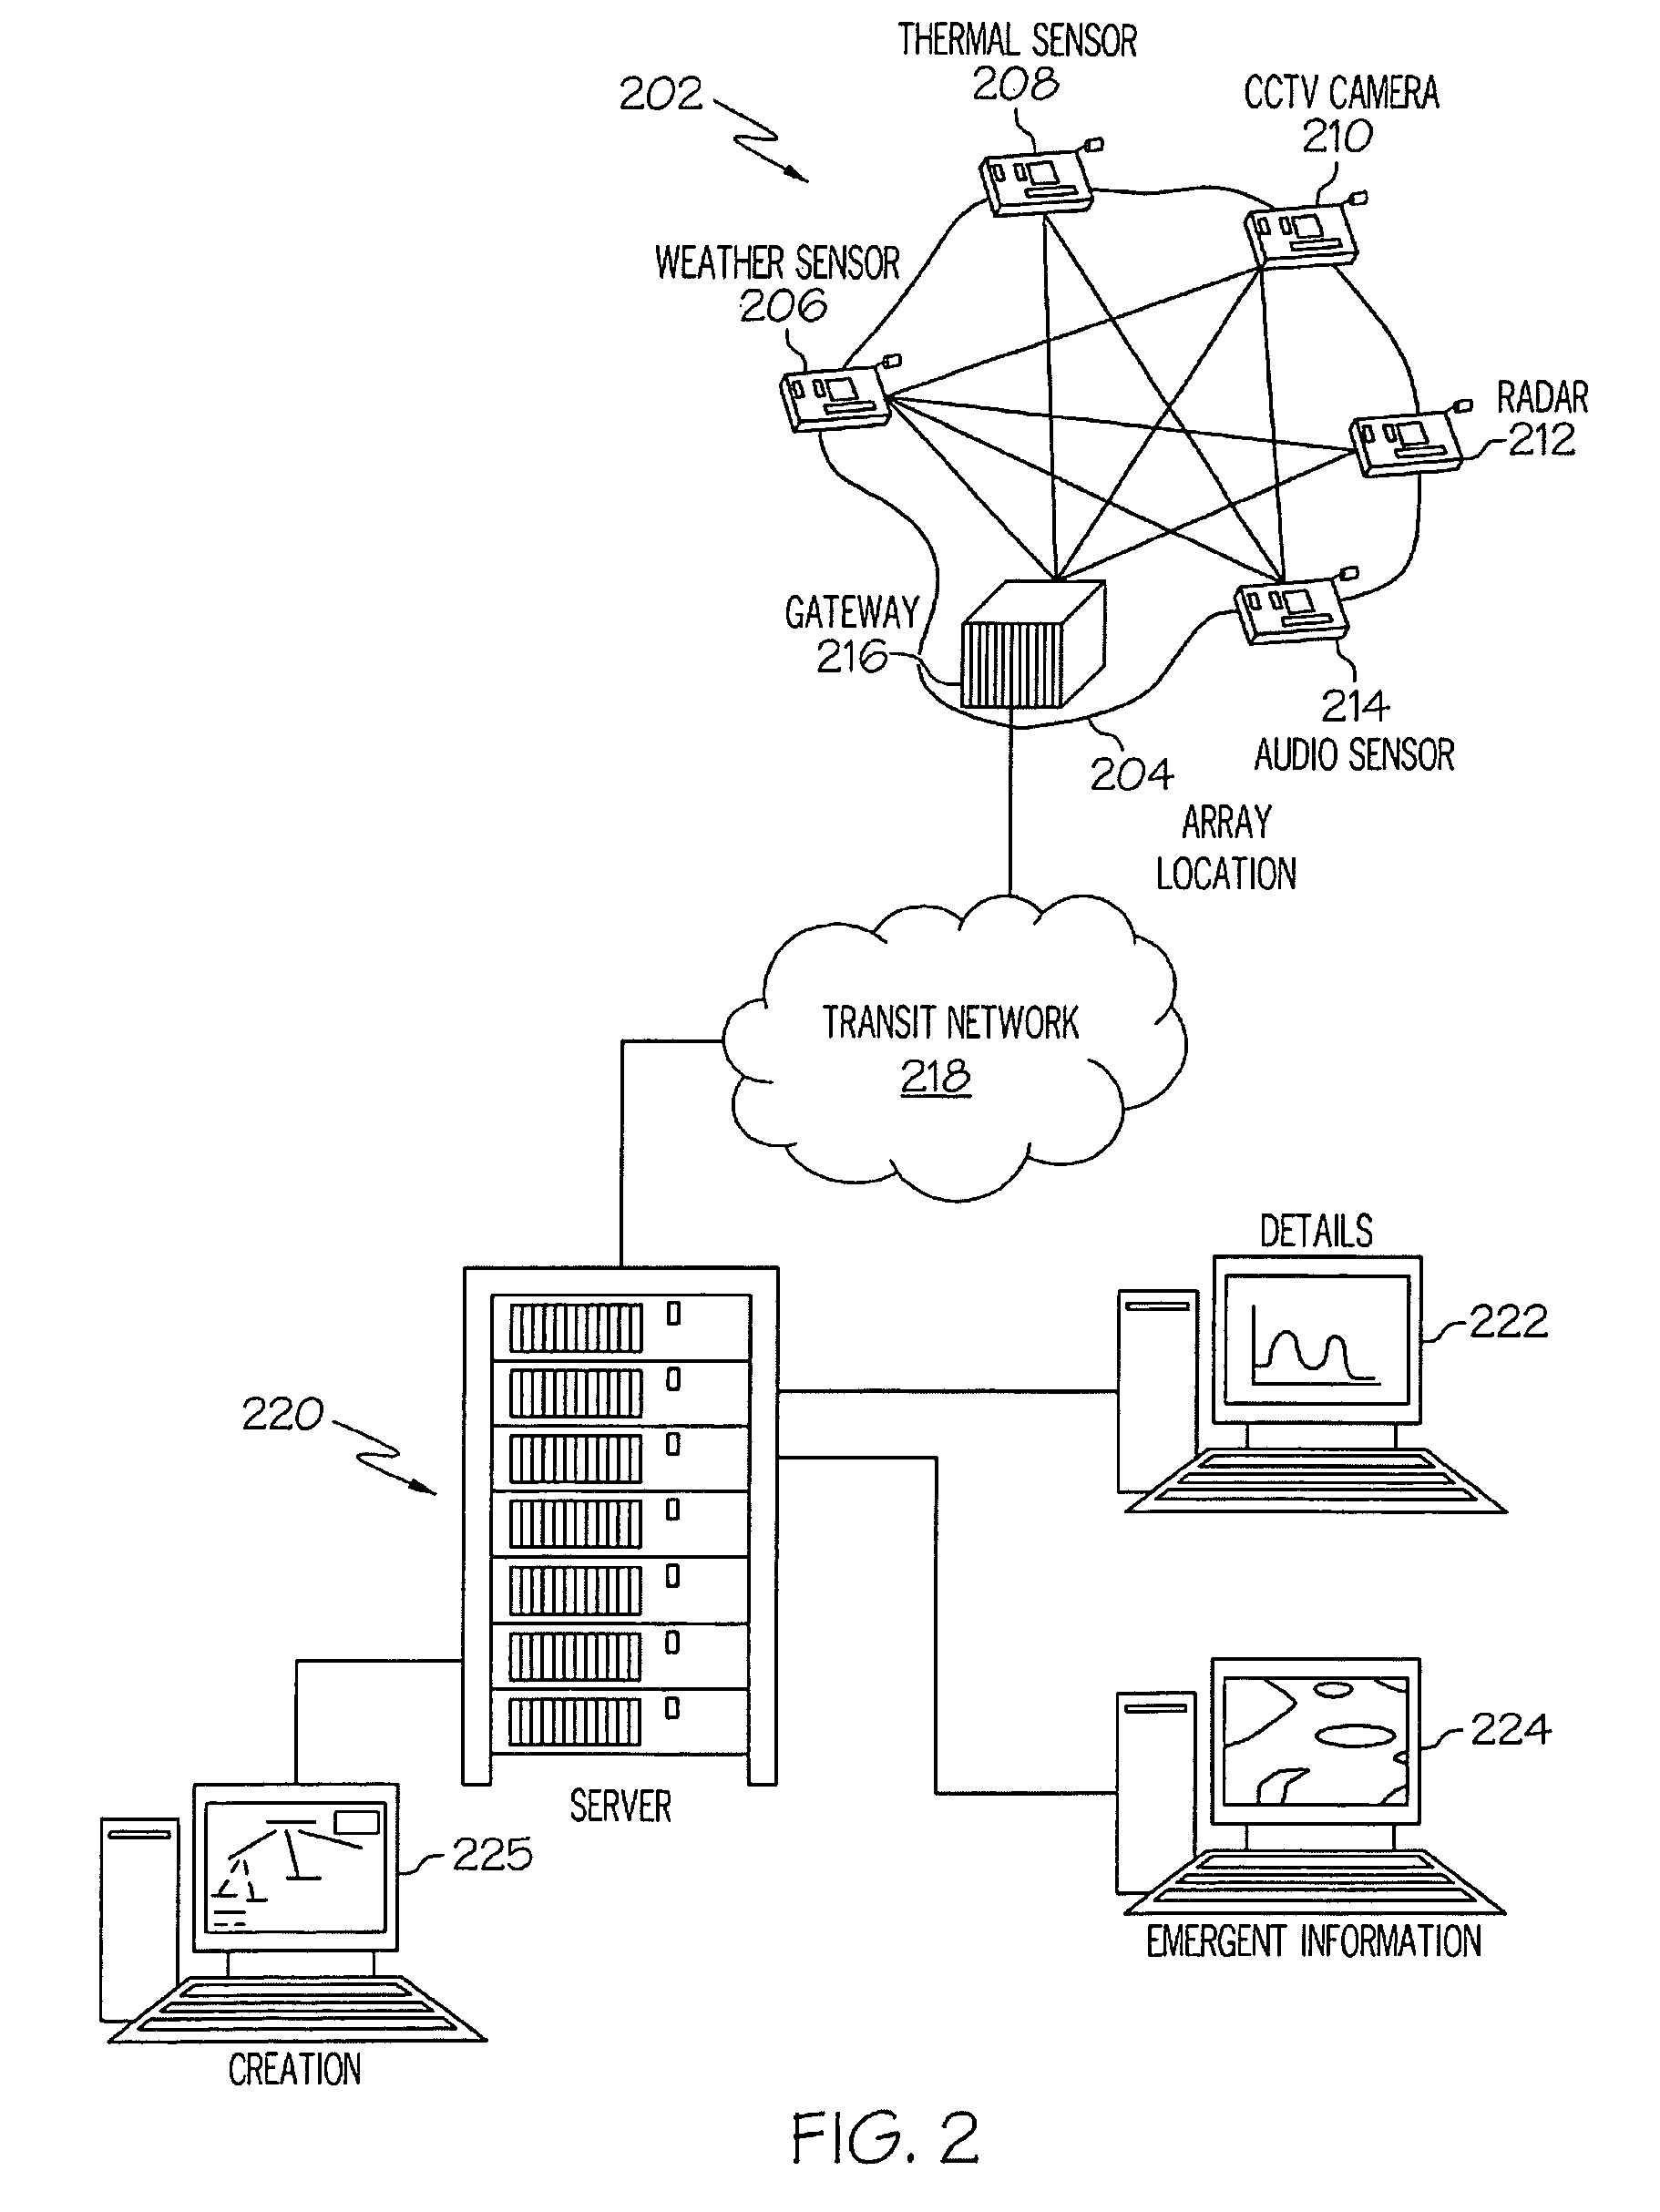 Data pattern generation, modification and management utilizing a semantic network-based graphical interface